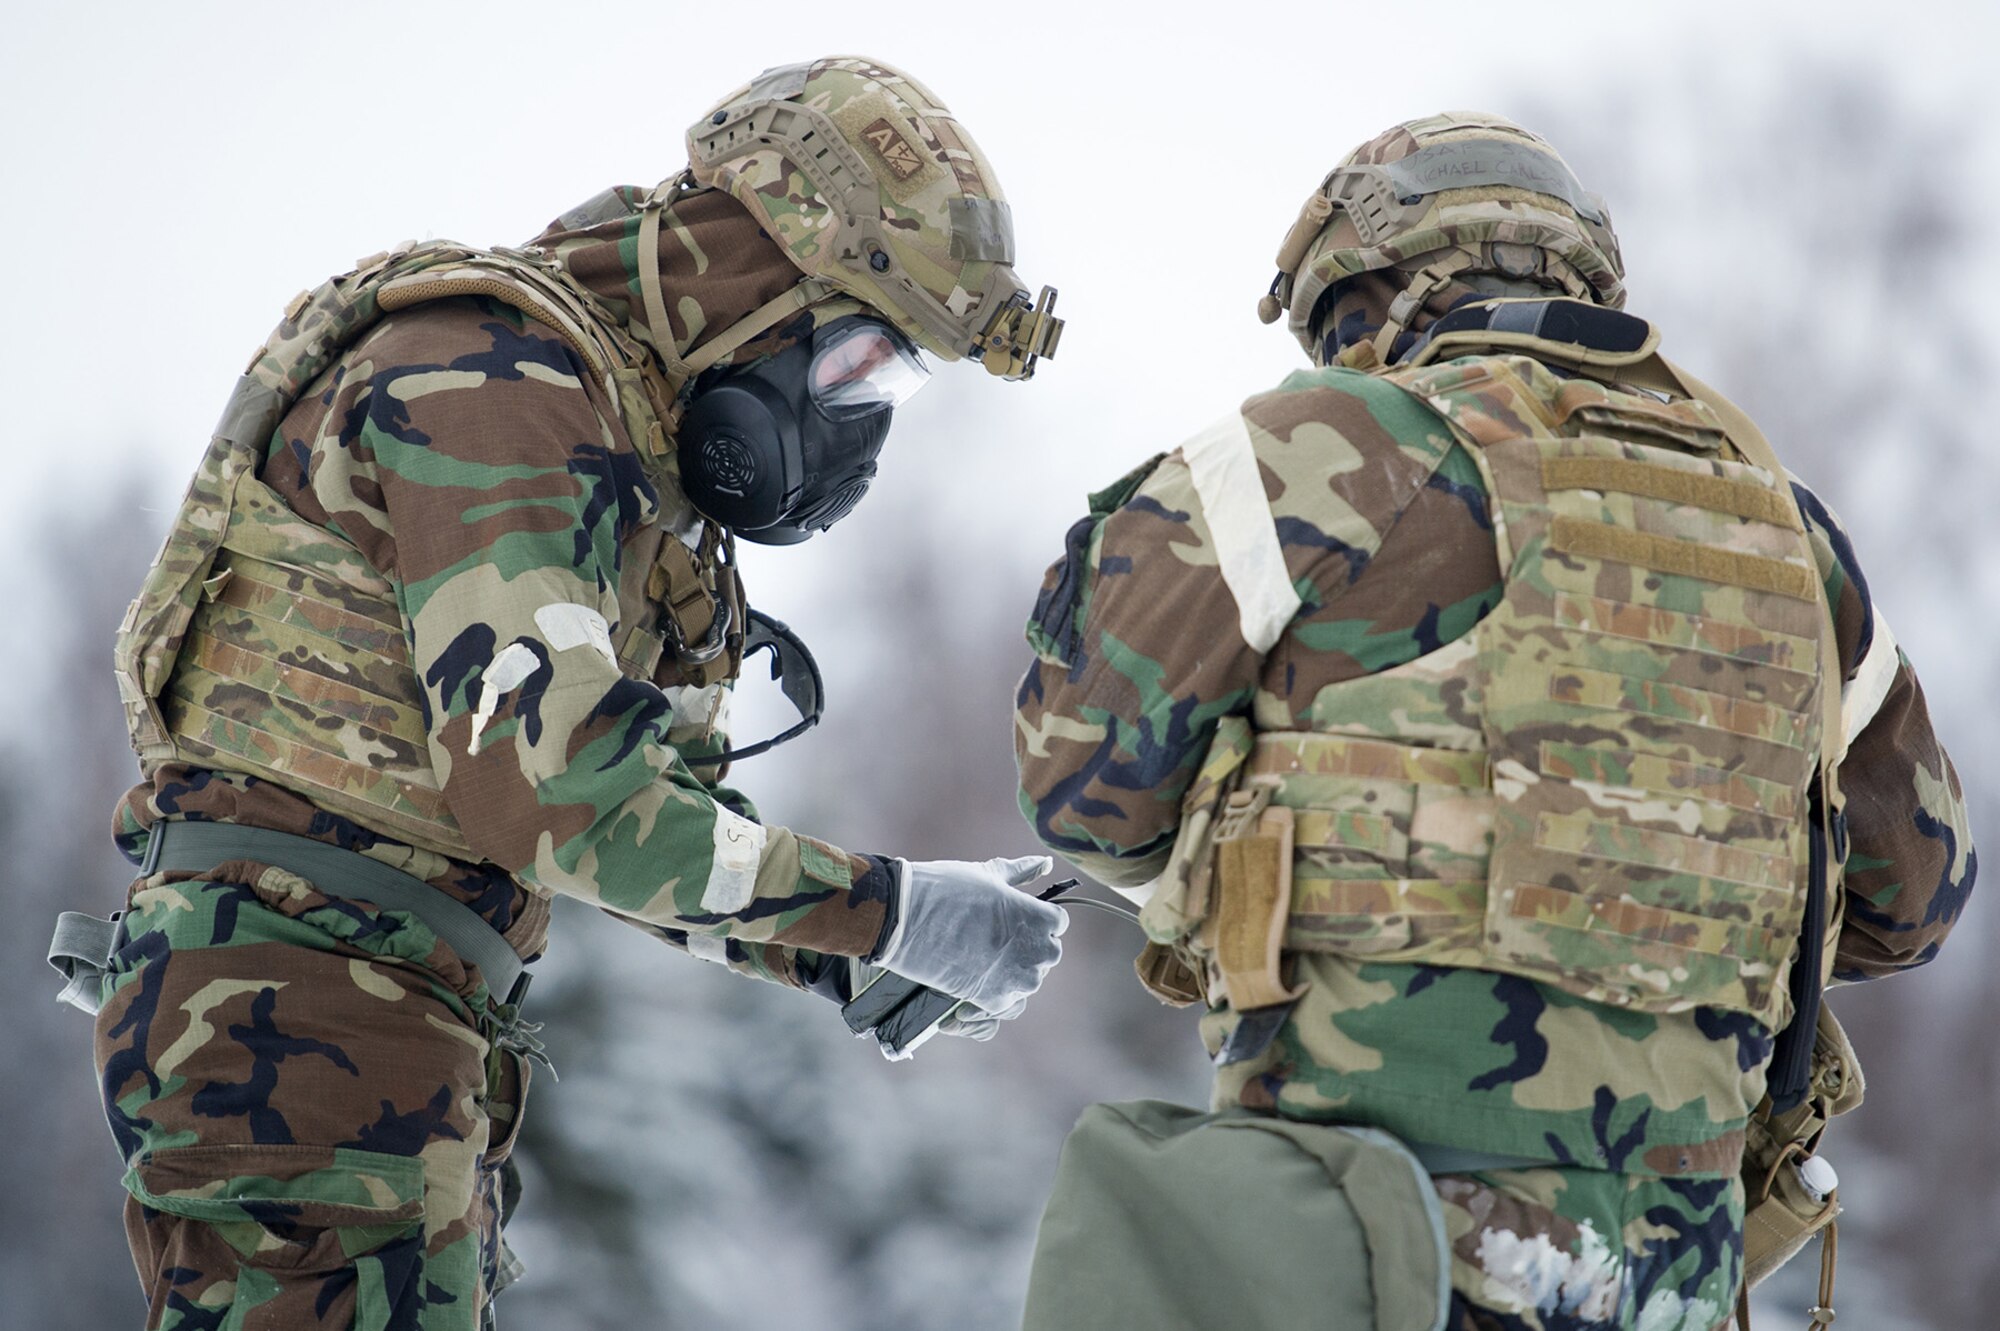 Senior Airmen Sterling Horton, left, and Michael Carlson, both assigned to the 673d Civil Engineer Squadron, Explosives Ordinance Disposal Flight, prepare a charge for a live-fire demolitions exercise in Mission Oriented Protective Posture 4 on Joint Base Elmendorf-Richardson, Alaska, Feb.14, 2018.  The Airmen were conducting EOD training in a simulated chemical weapons contaminated environment.